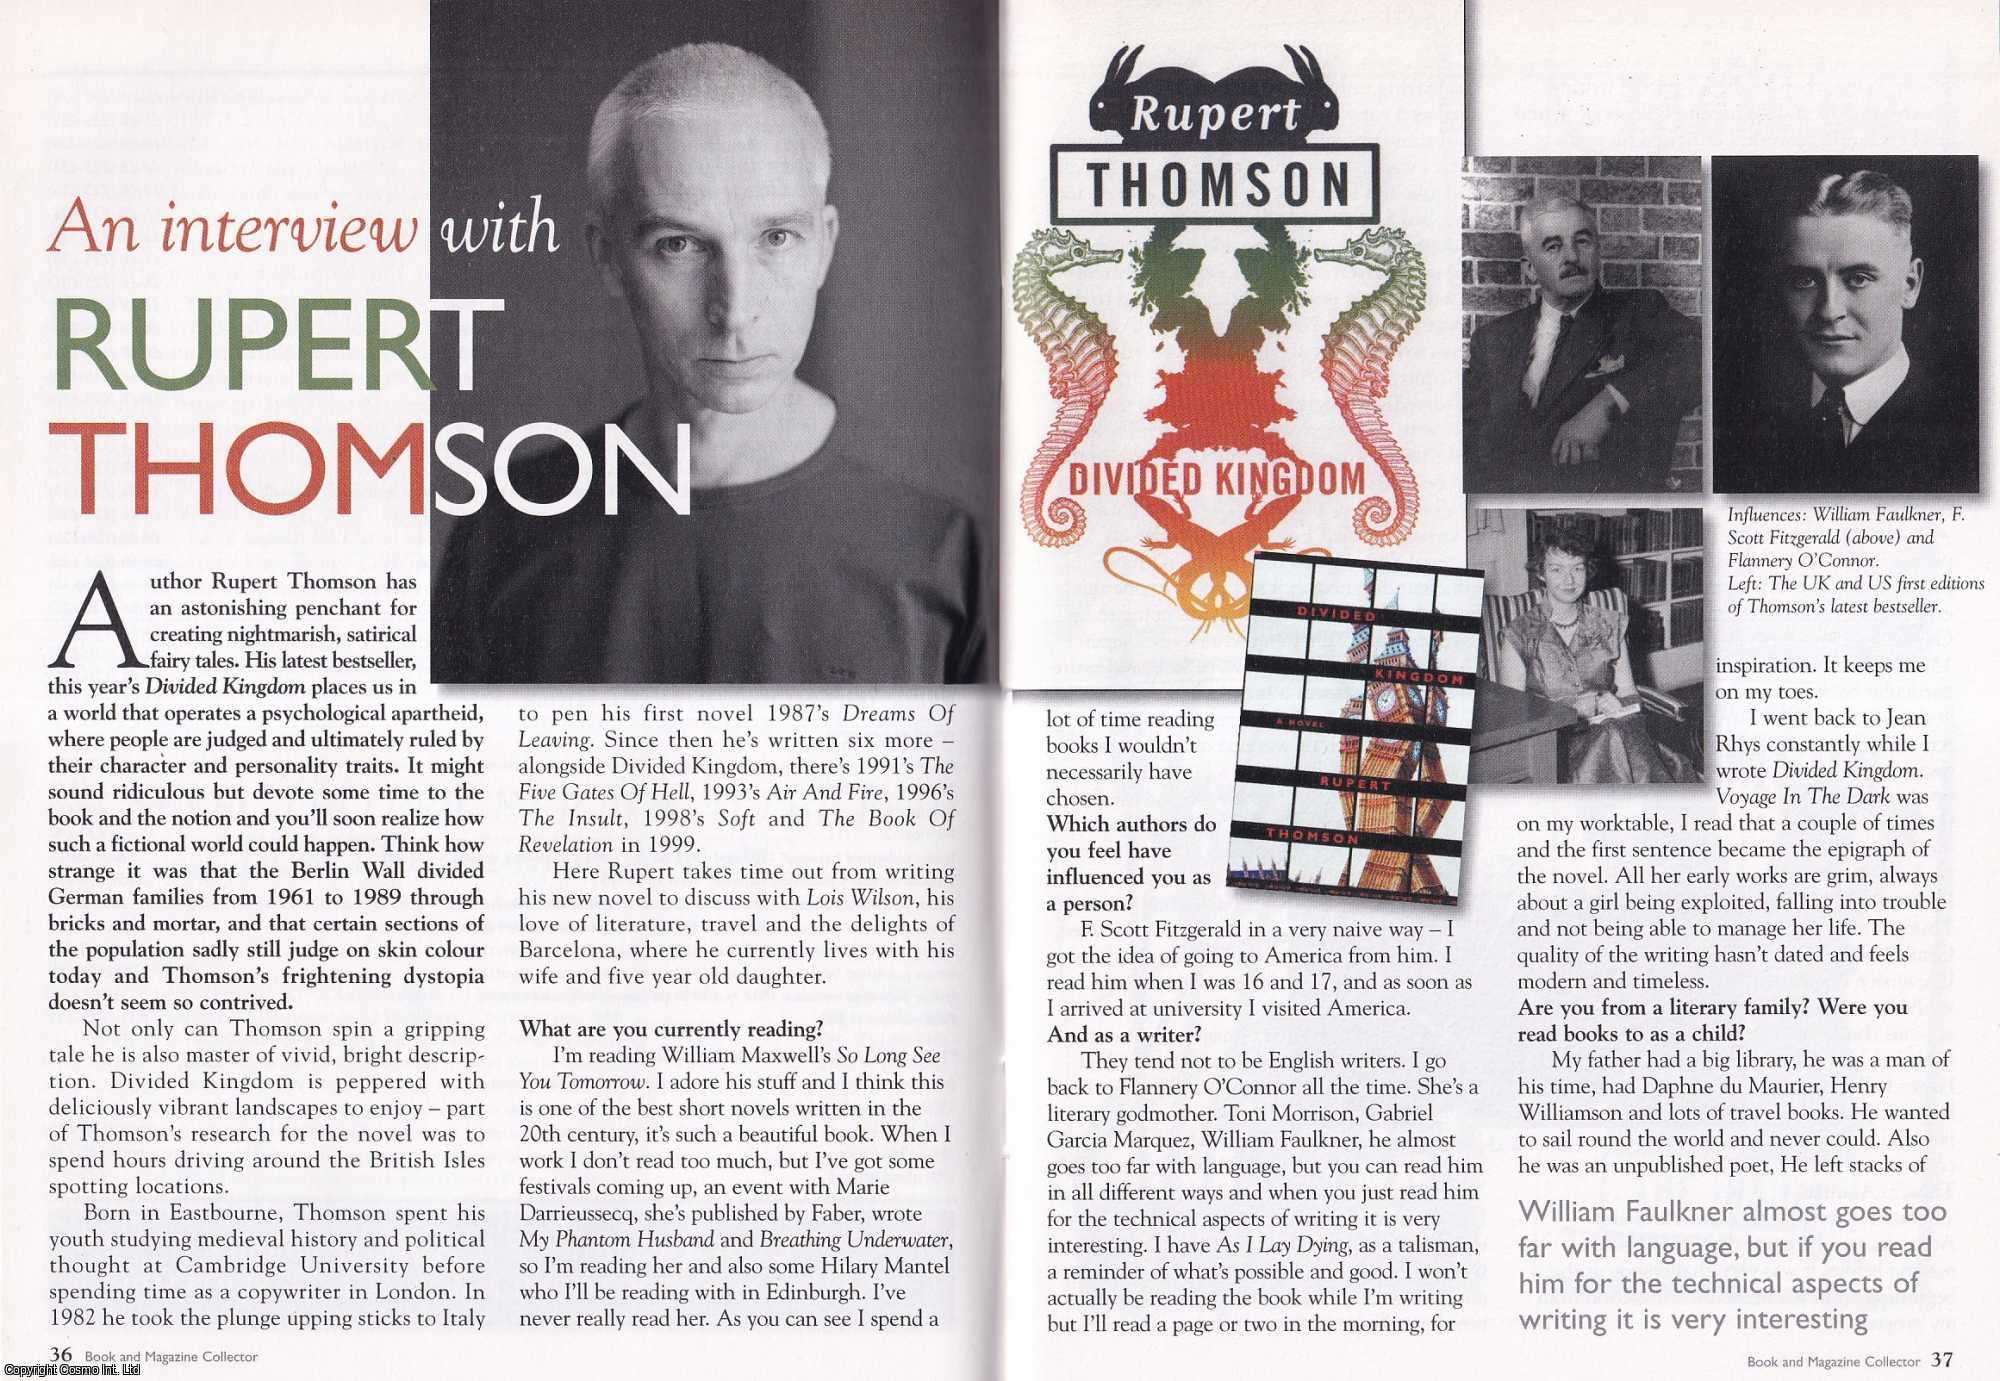 --- - An Interview with Rupert Thomson. This is an original article separated from an issue of The Book & Magazine Collector publication.